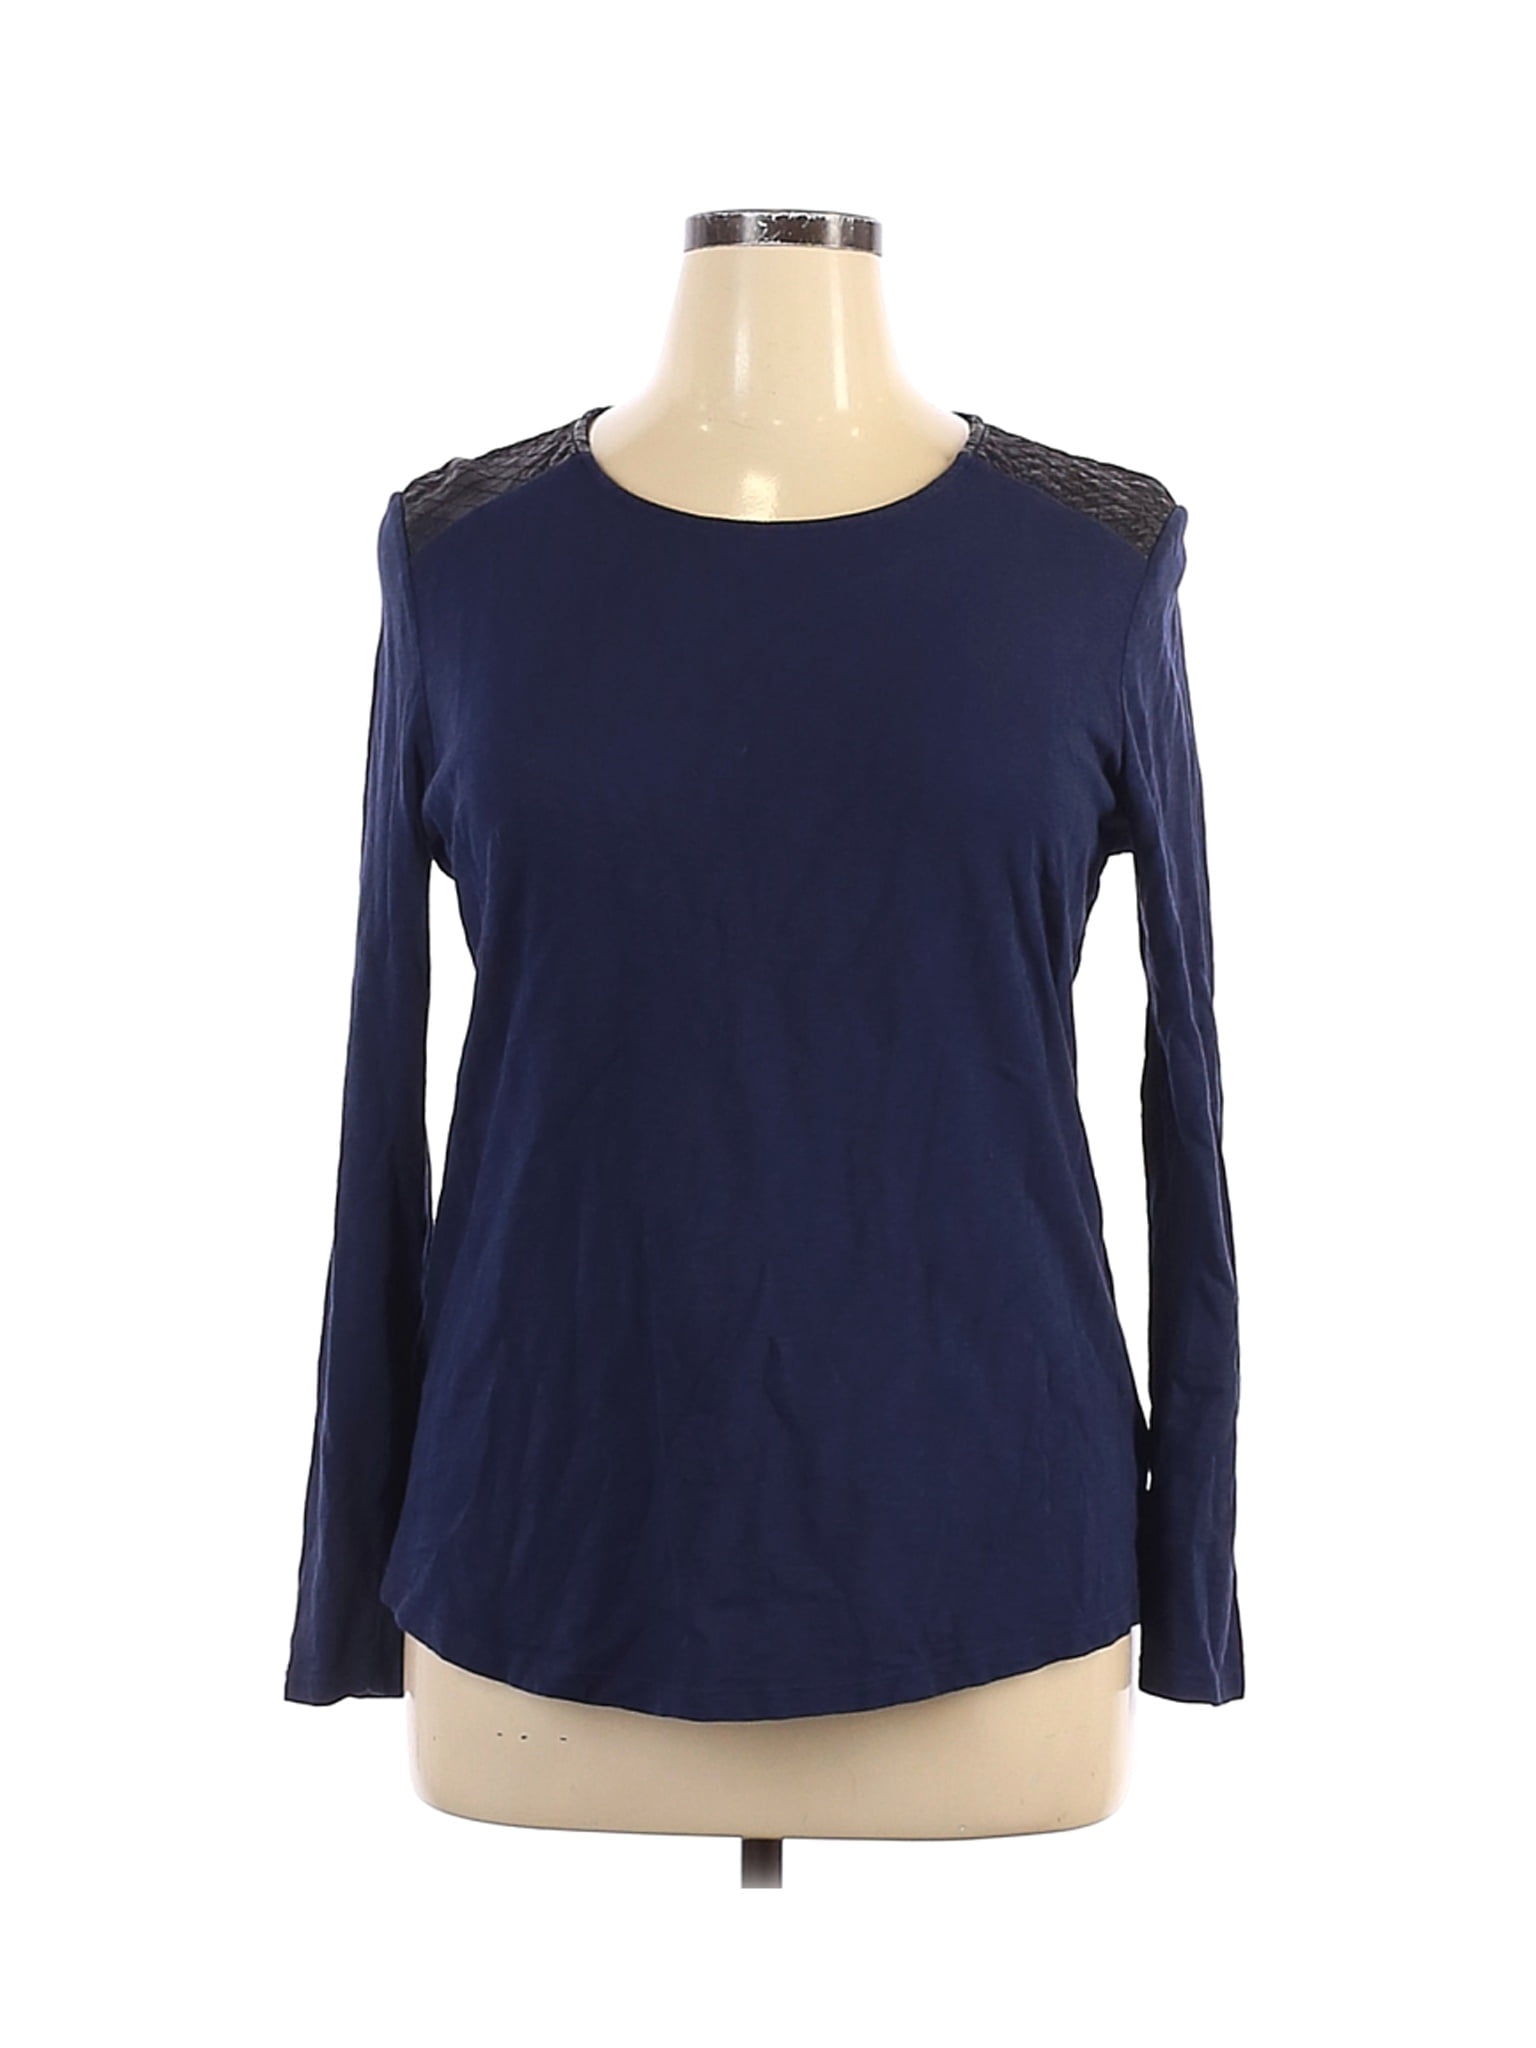 Lord & Taylor - Pre-Owned Lord & Taylor Women's Size XL Long Sleeve Top ...